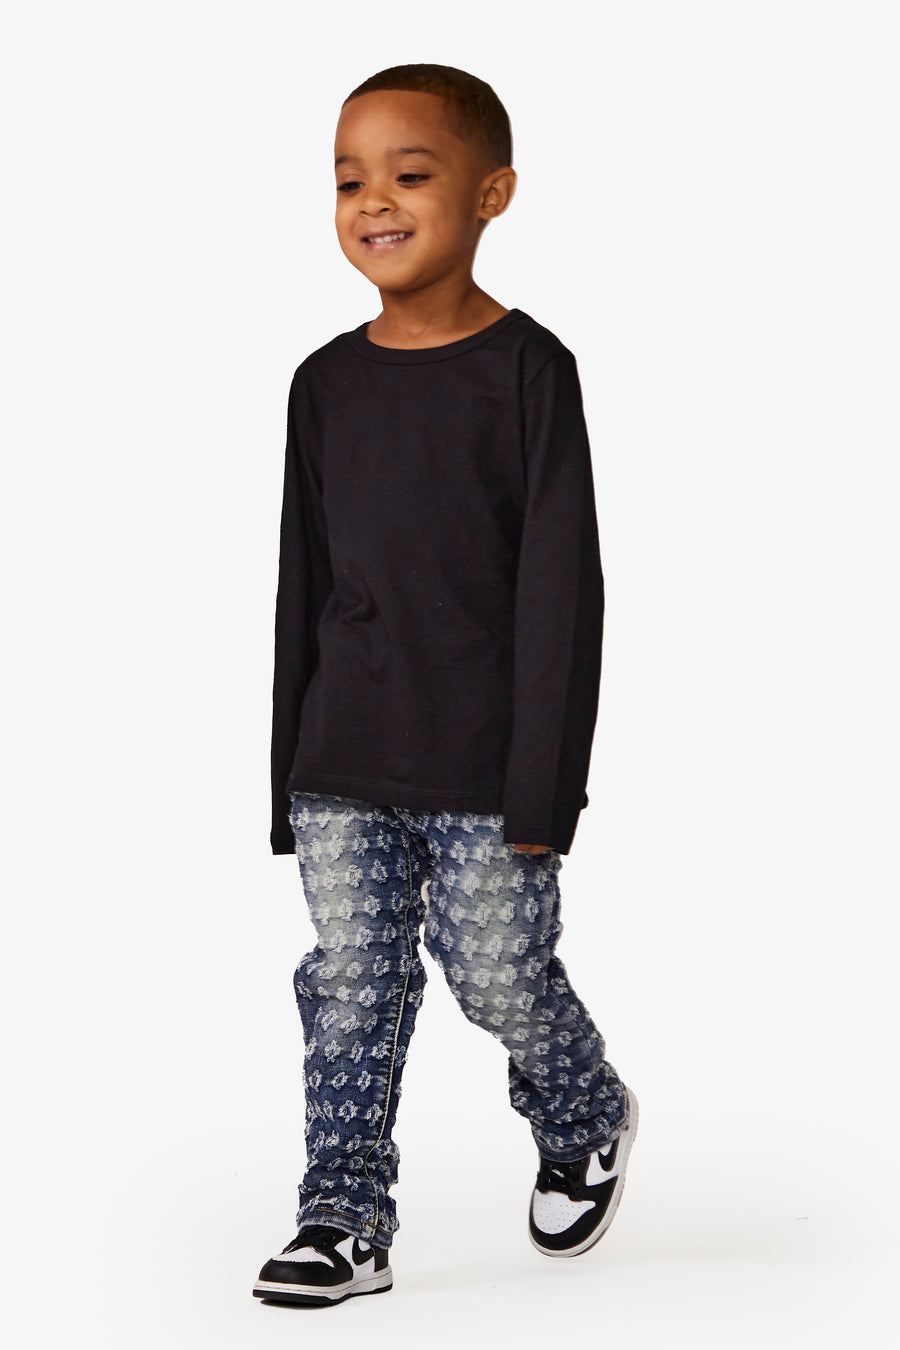 VPLAY KIDS JEANS "REPEAT" BLUE WASHED